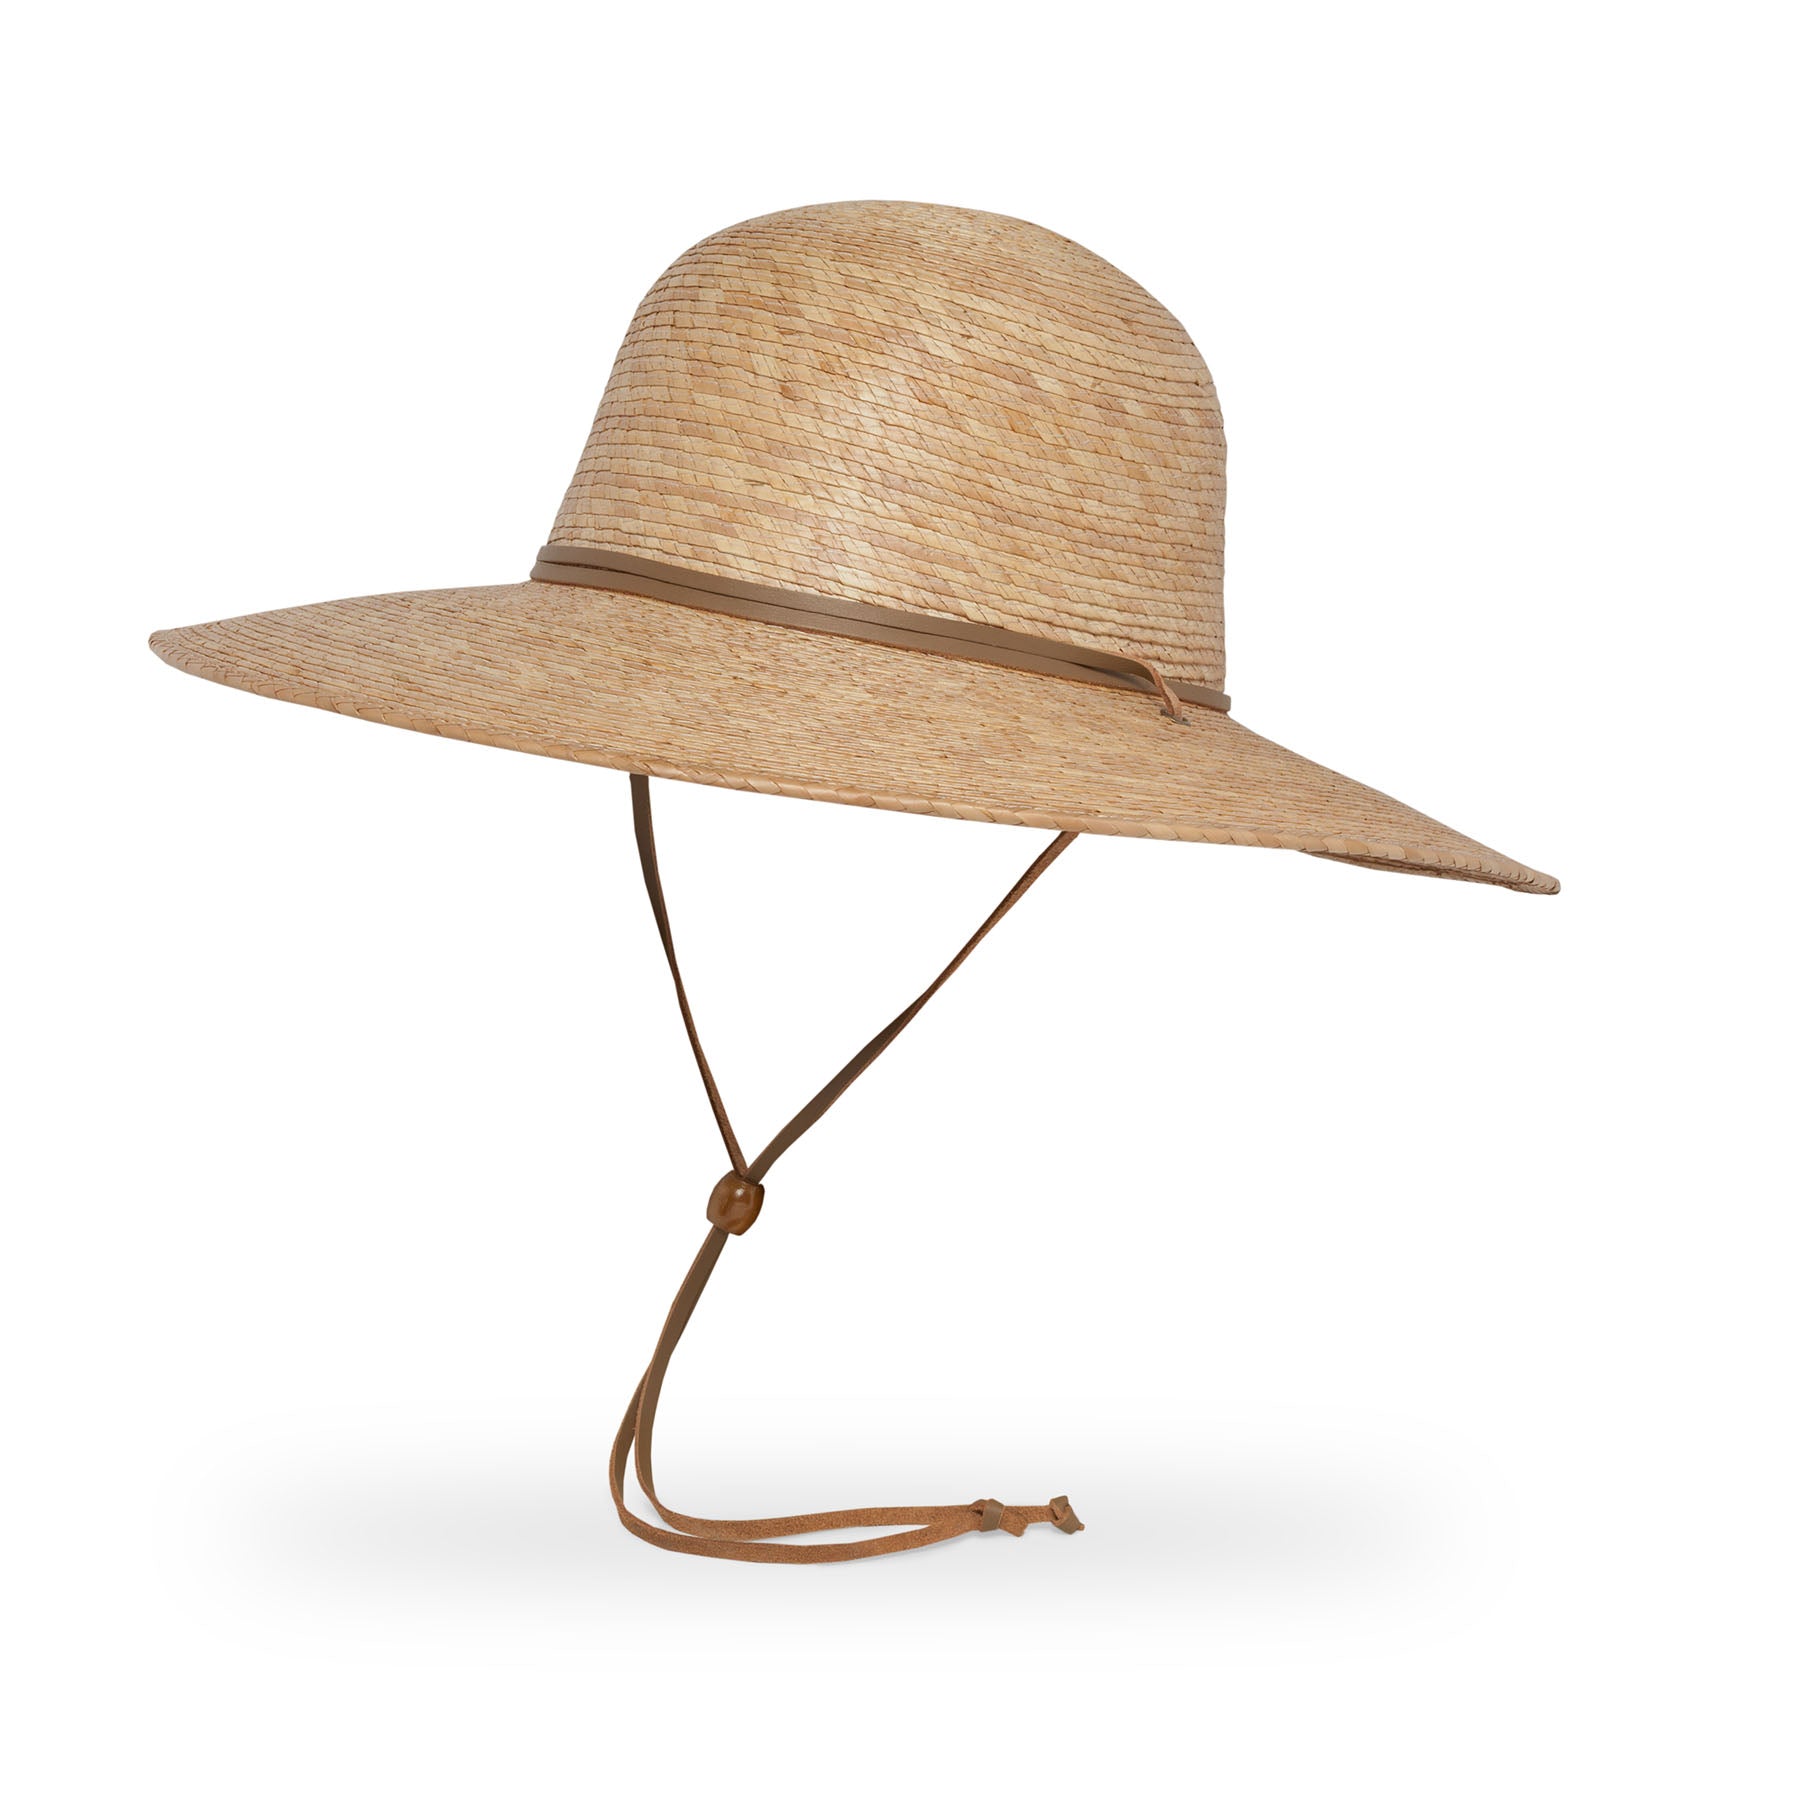 a photo of the sunday afternoons tradewinds hat showing the chin strap and hat